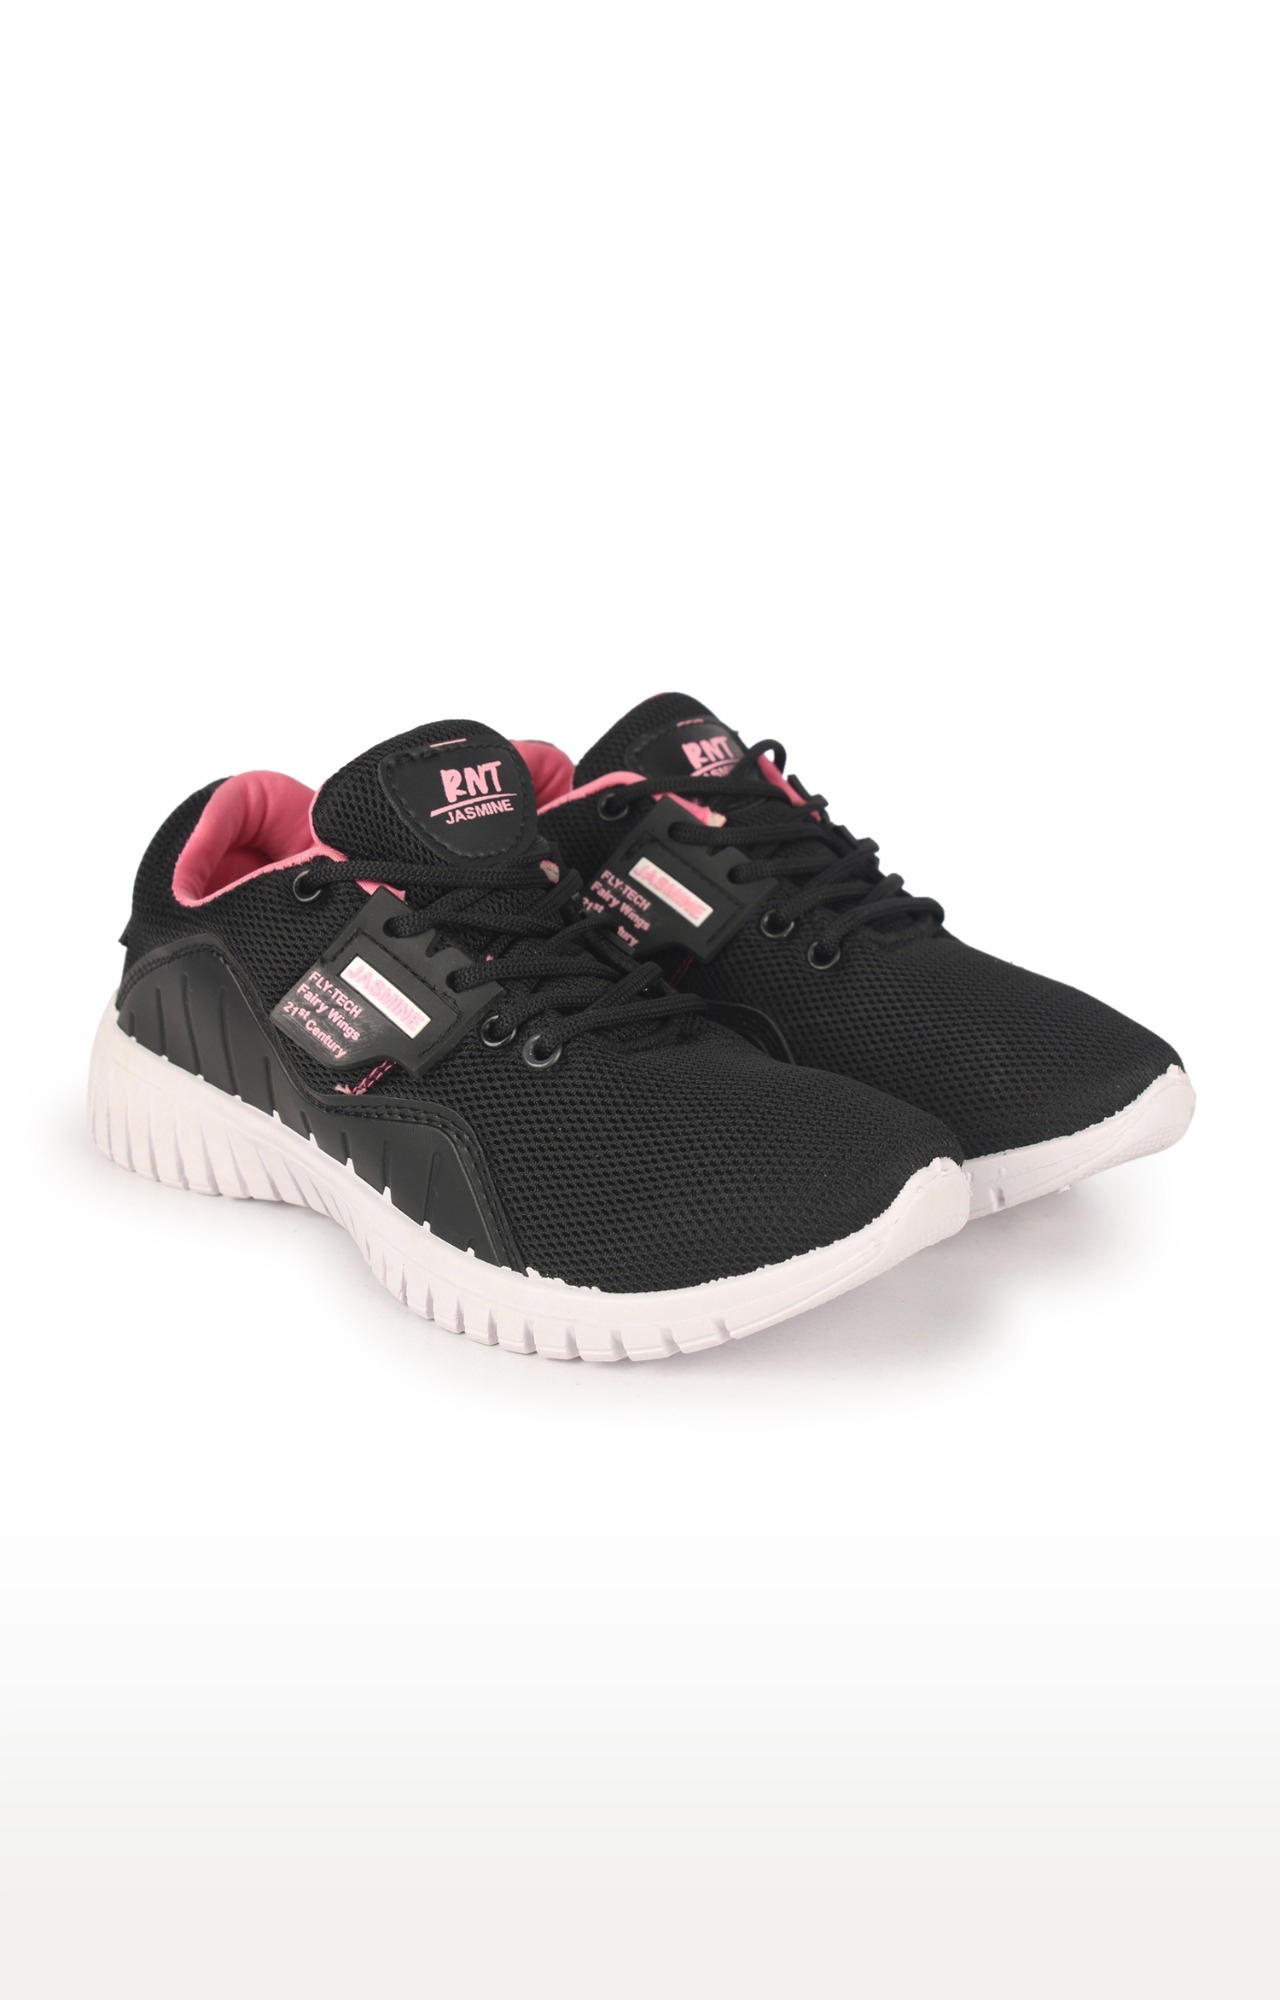 RNT Jasmine Black and Pink Shoes for Women